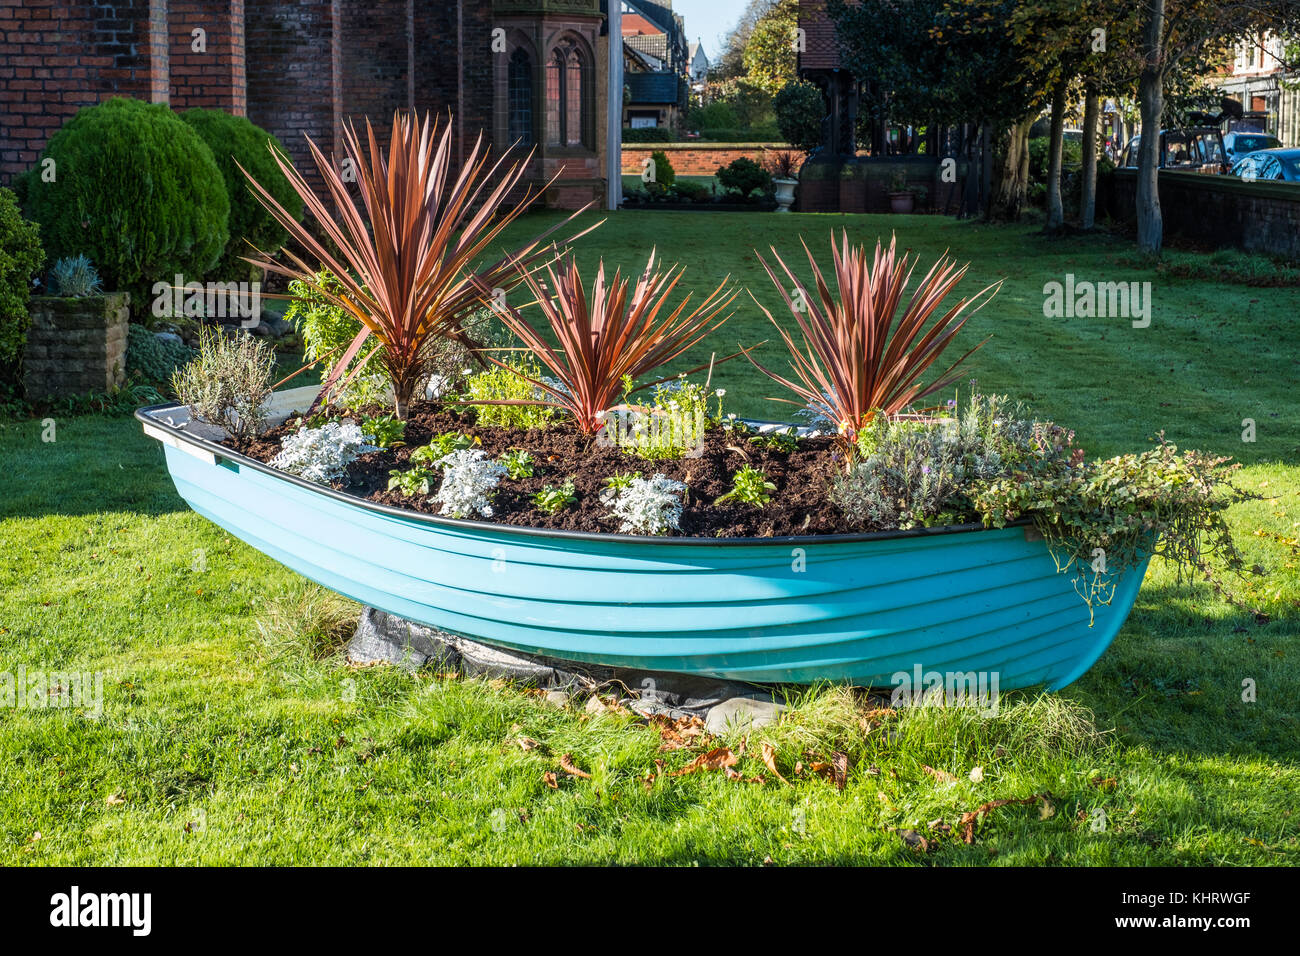 A lovely old rowing boat used as a planter and garden feature. Stock Photo